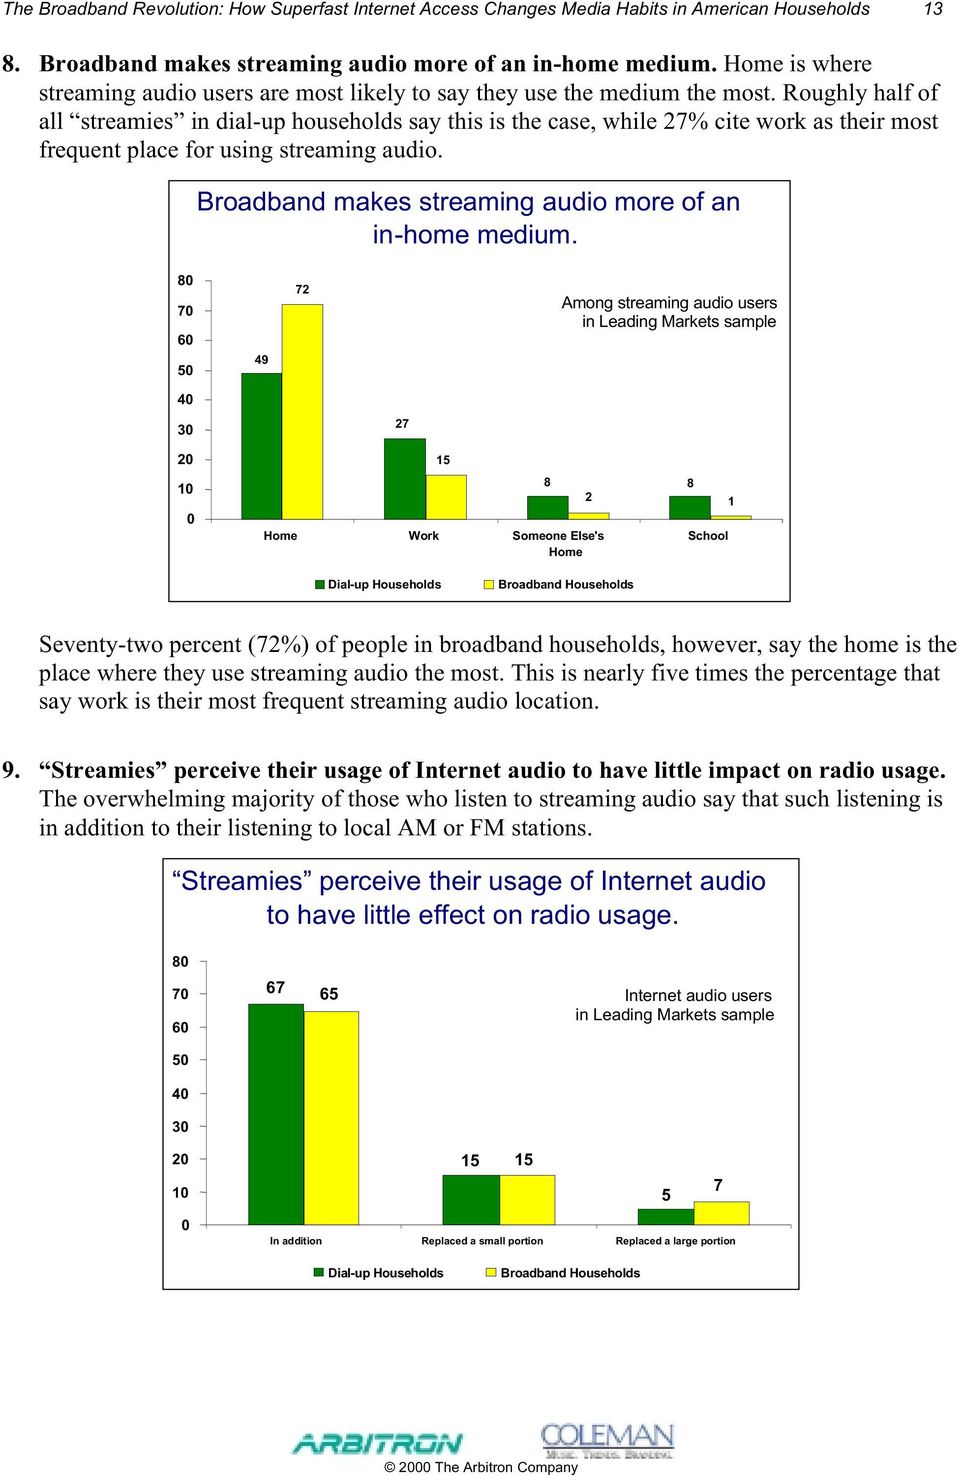 Roughly half of all streamies in dial-up households say this is the case, while 27% cite work as their most frequent place for using streaming audio.